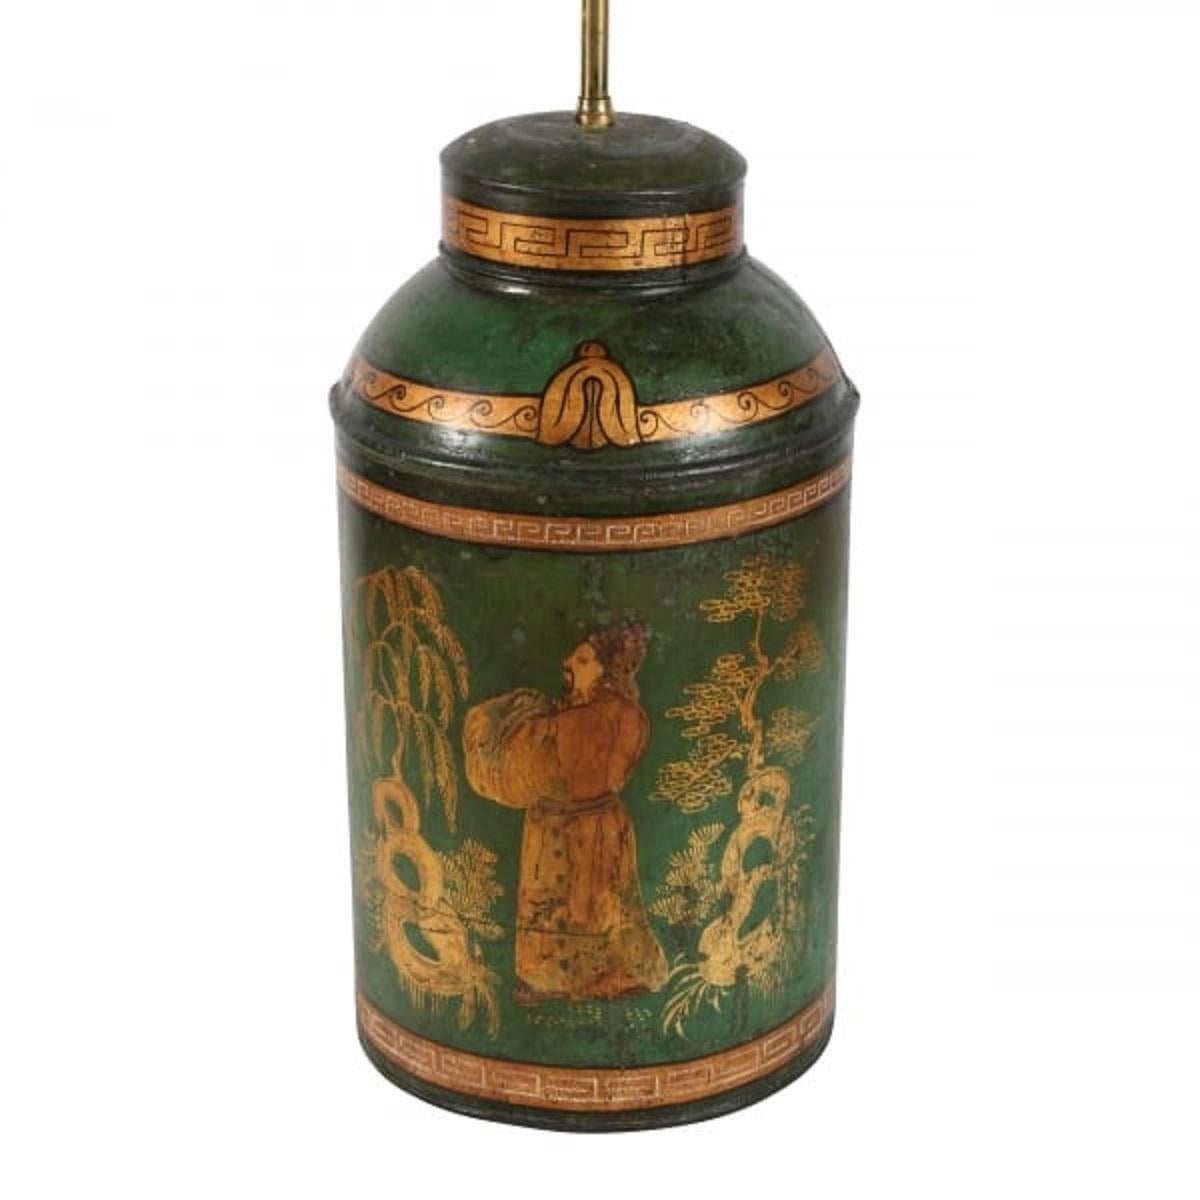 A middle of the 19th century Victorian tea tin.

The tea tin has a green background that has gilt chinoiserie decoration.


The tea tin has been converted into a table lamp and has a brass twin lamp holder fitted into the top.

The tea tin